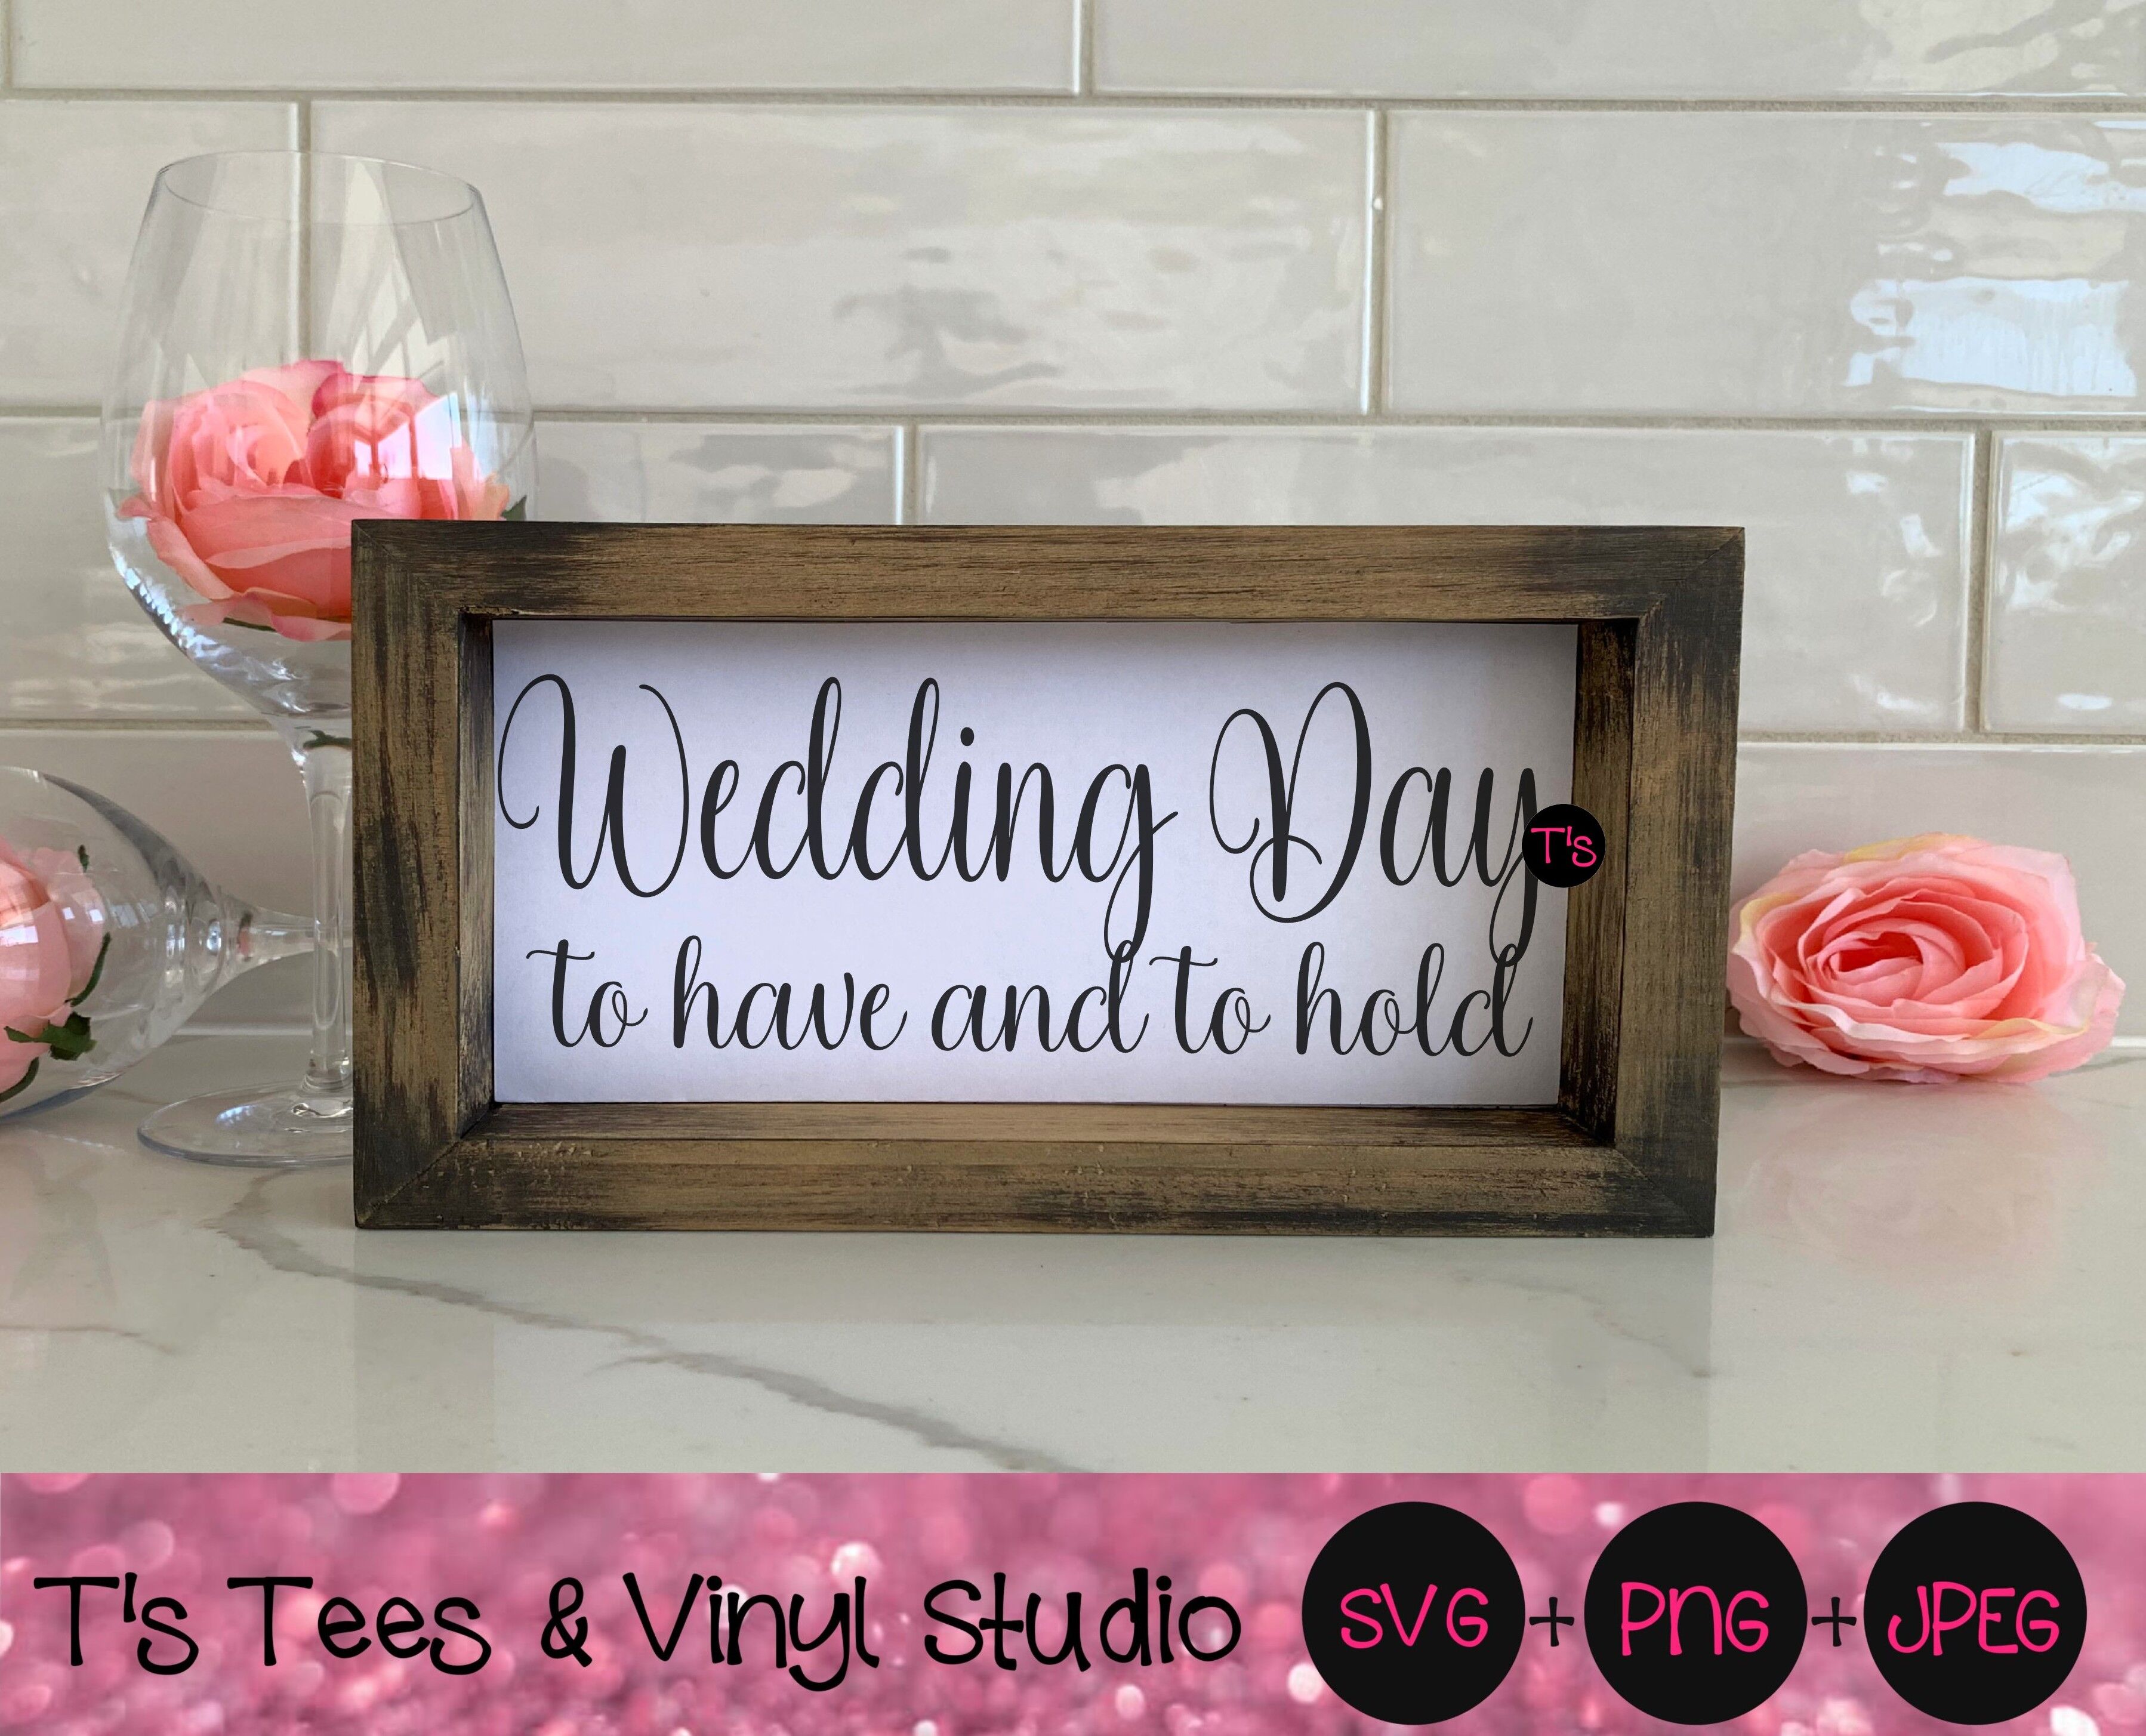 Download Wedding Svg Wedding Day Svg To Have And To Hold Svg Wedding Png We By T S Tees Vinyl Studio Thehungryjpeg Com